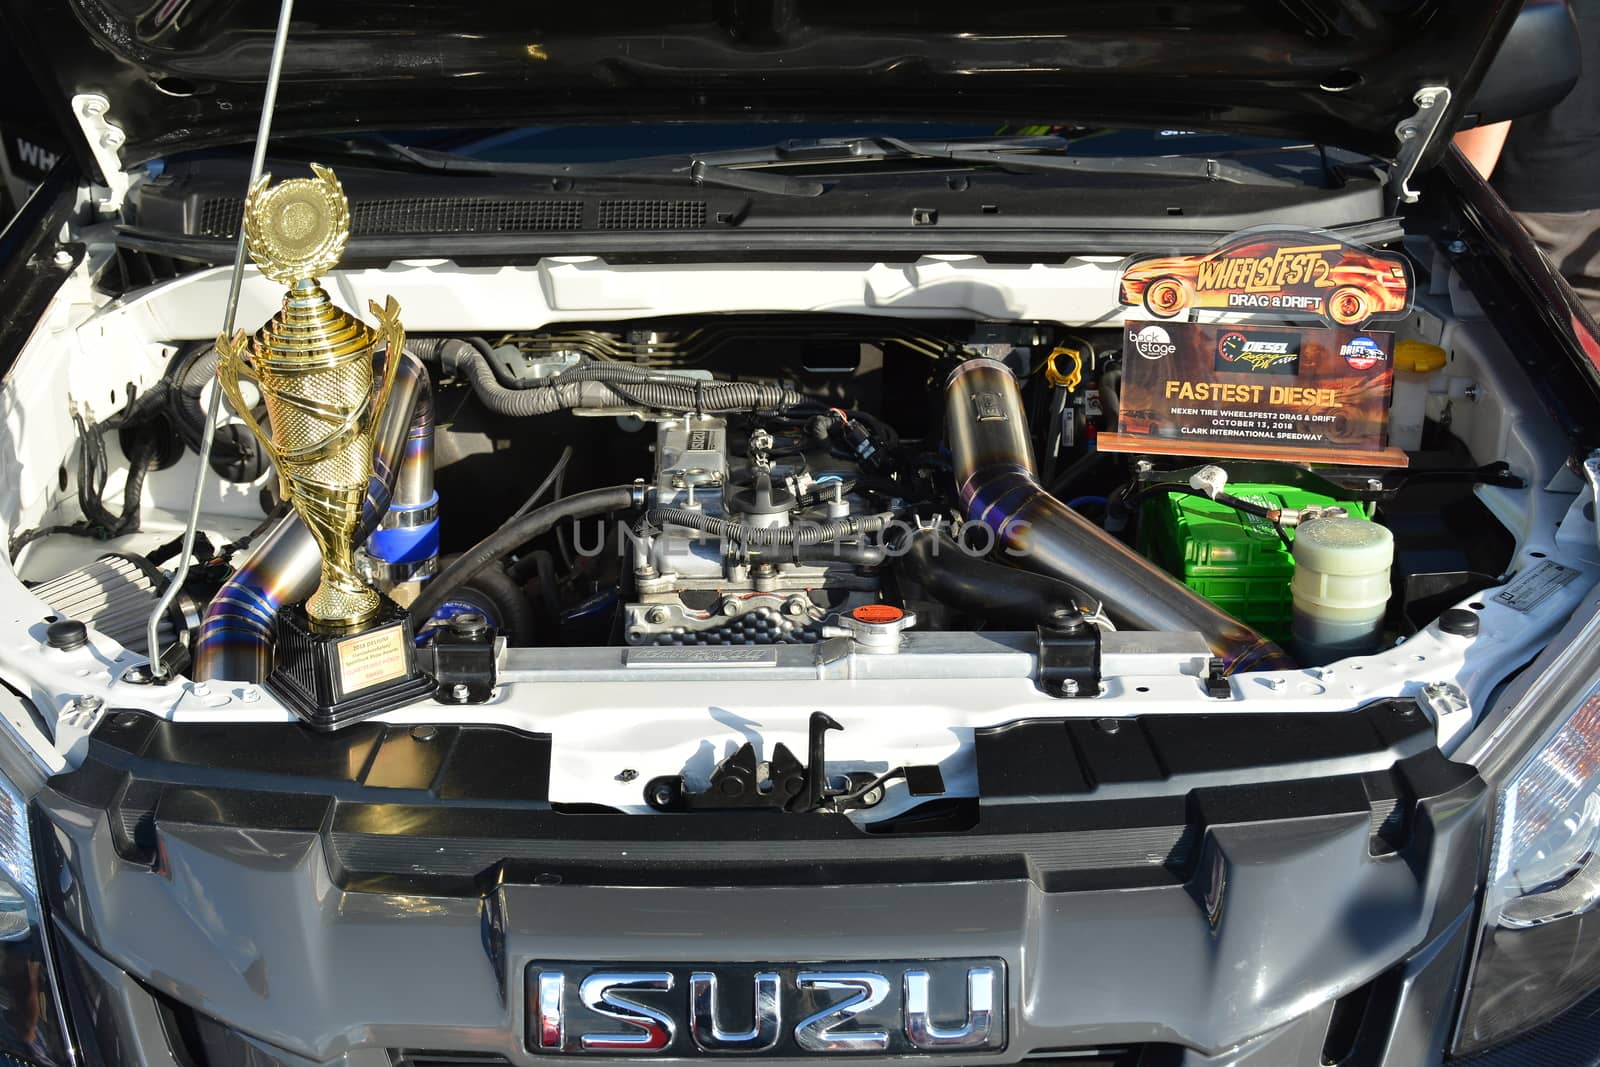 PASAY, PH - DEC 8 - Isuzu dmax pick up motor engine at Bumper to Bumper car show on December 8, 2018 in Pasay, Philippines.